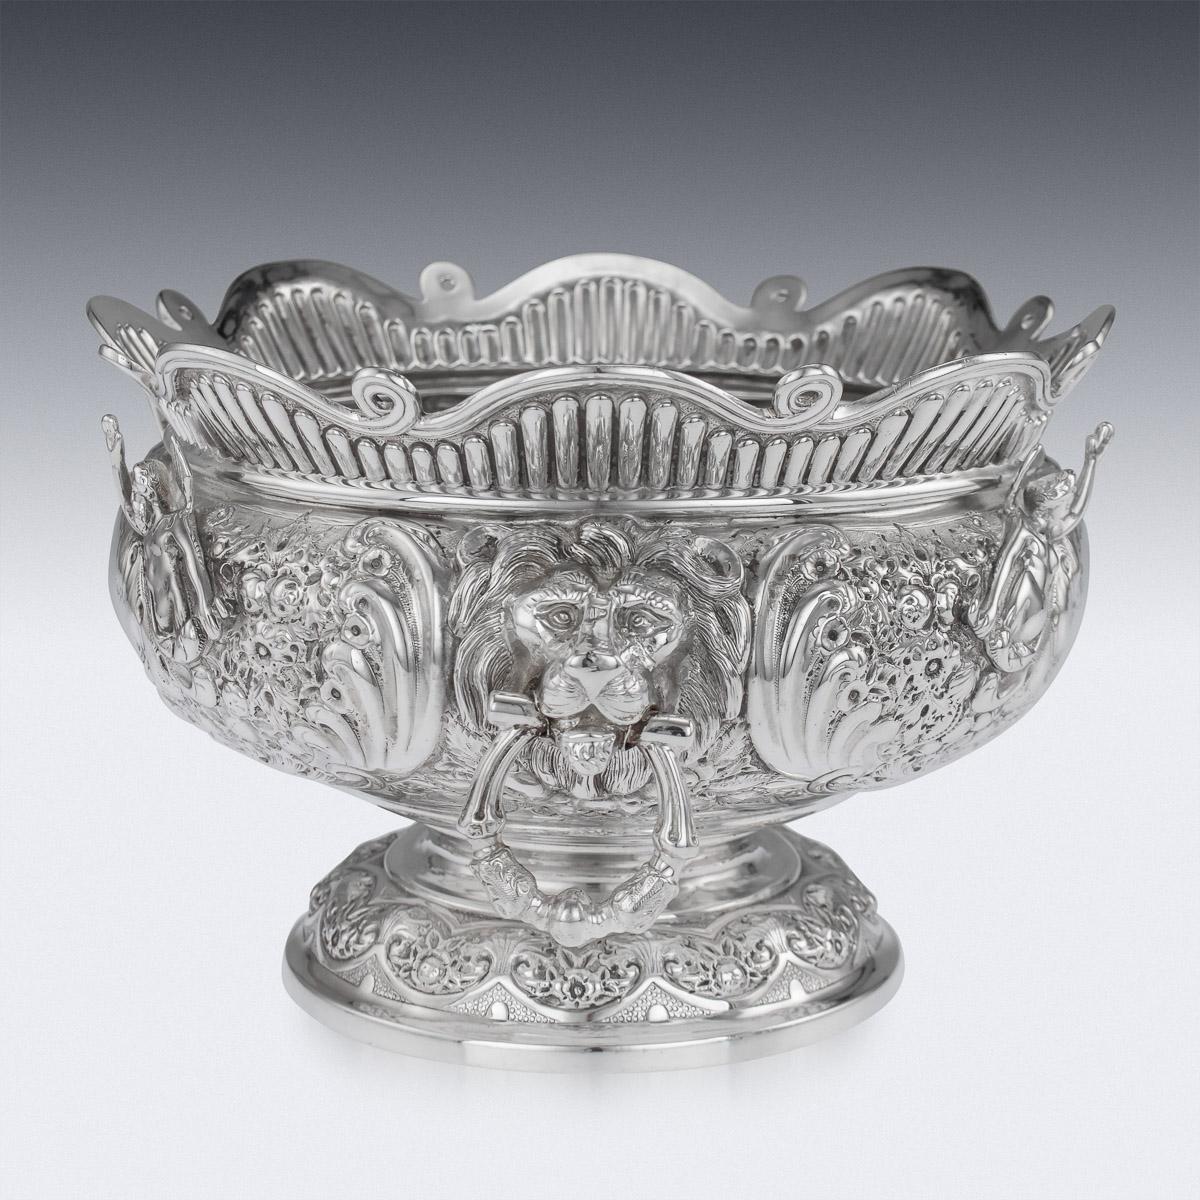 Antique late-19th century Victorian solid silver Armada bowl, the body is profusely chased and embossed with a crisp floral decoration, each side features cast applied projecting angels to either side of a vacant cartouche, applied with lion's masks